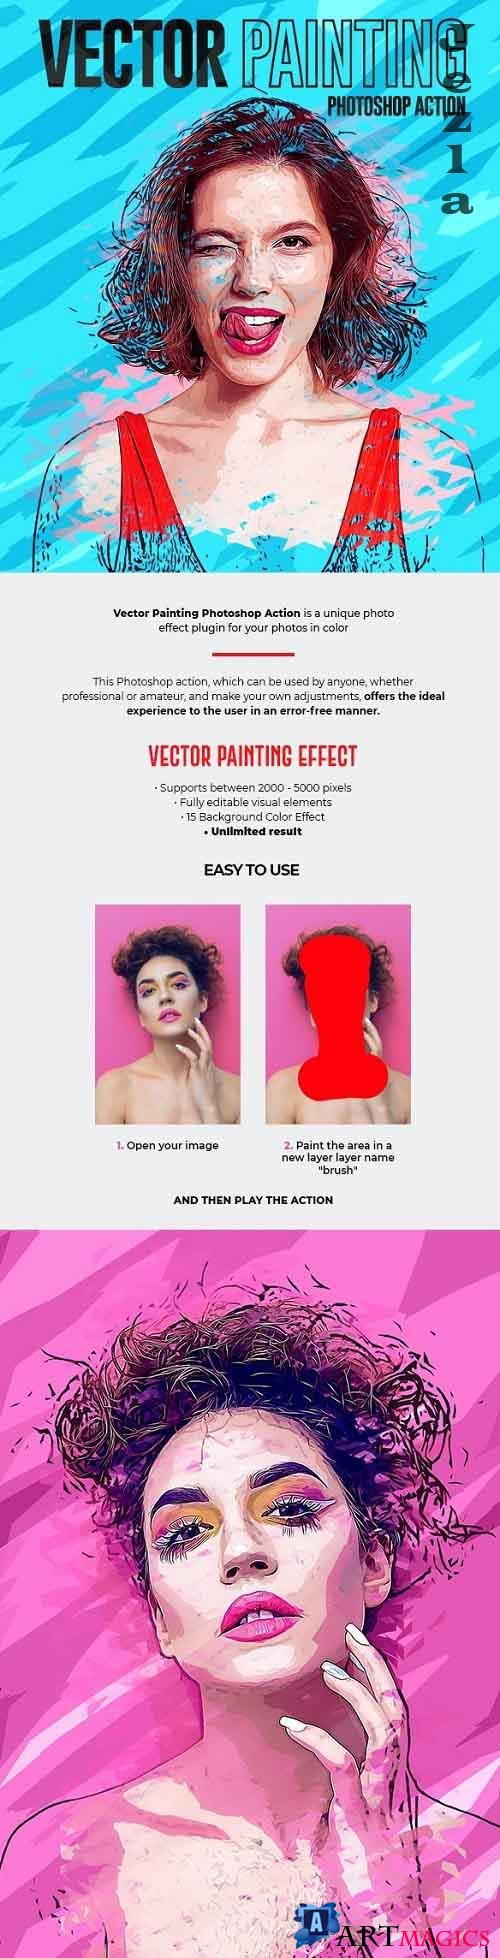 Vector Painting Effect Photoshop Action 26992554